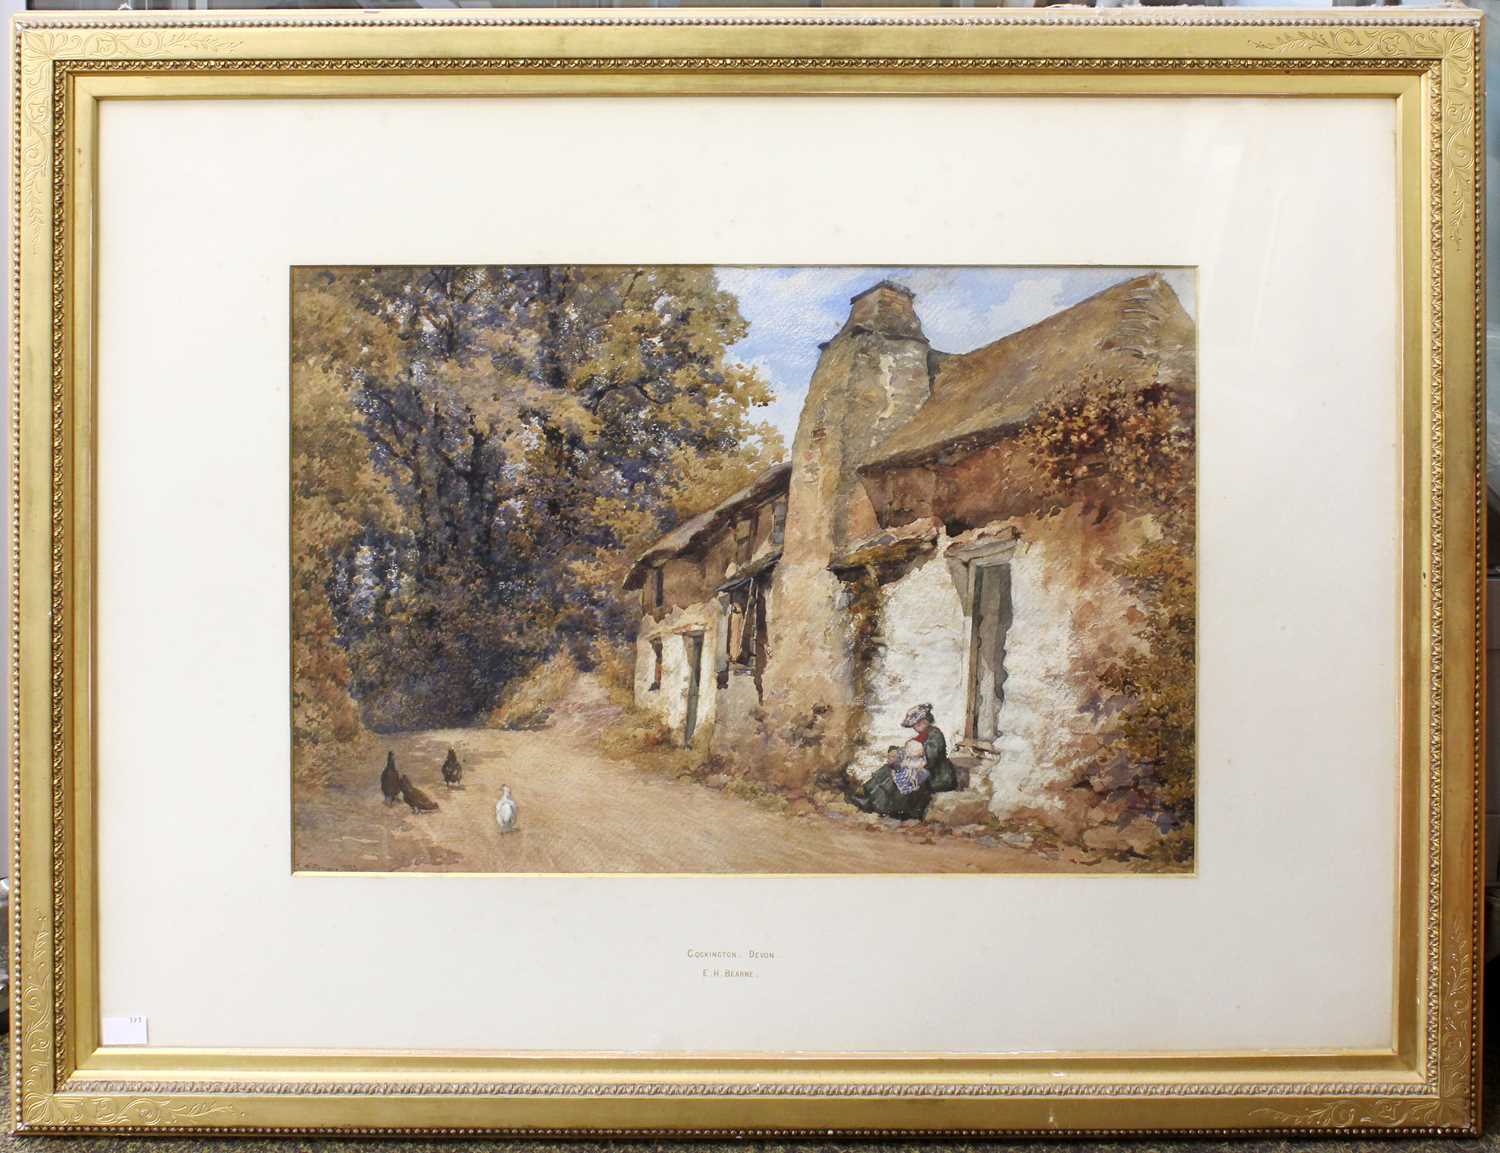 Edward Henry Bearne (fl.1870-1880) "Cockington, Devon" Signed and dated 1873, watercolour, 36cm by - Image 2 of 4